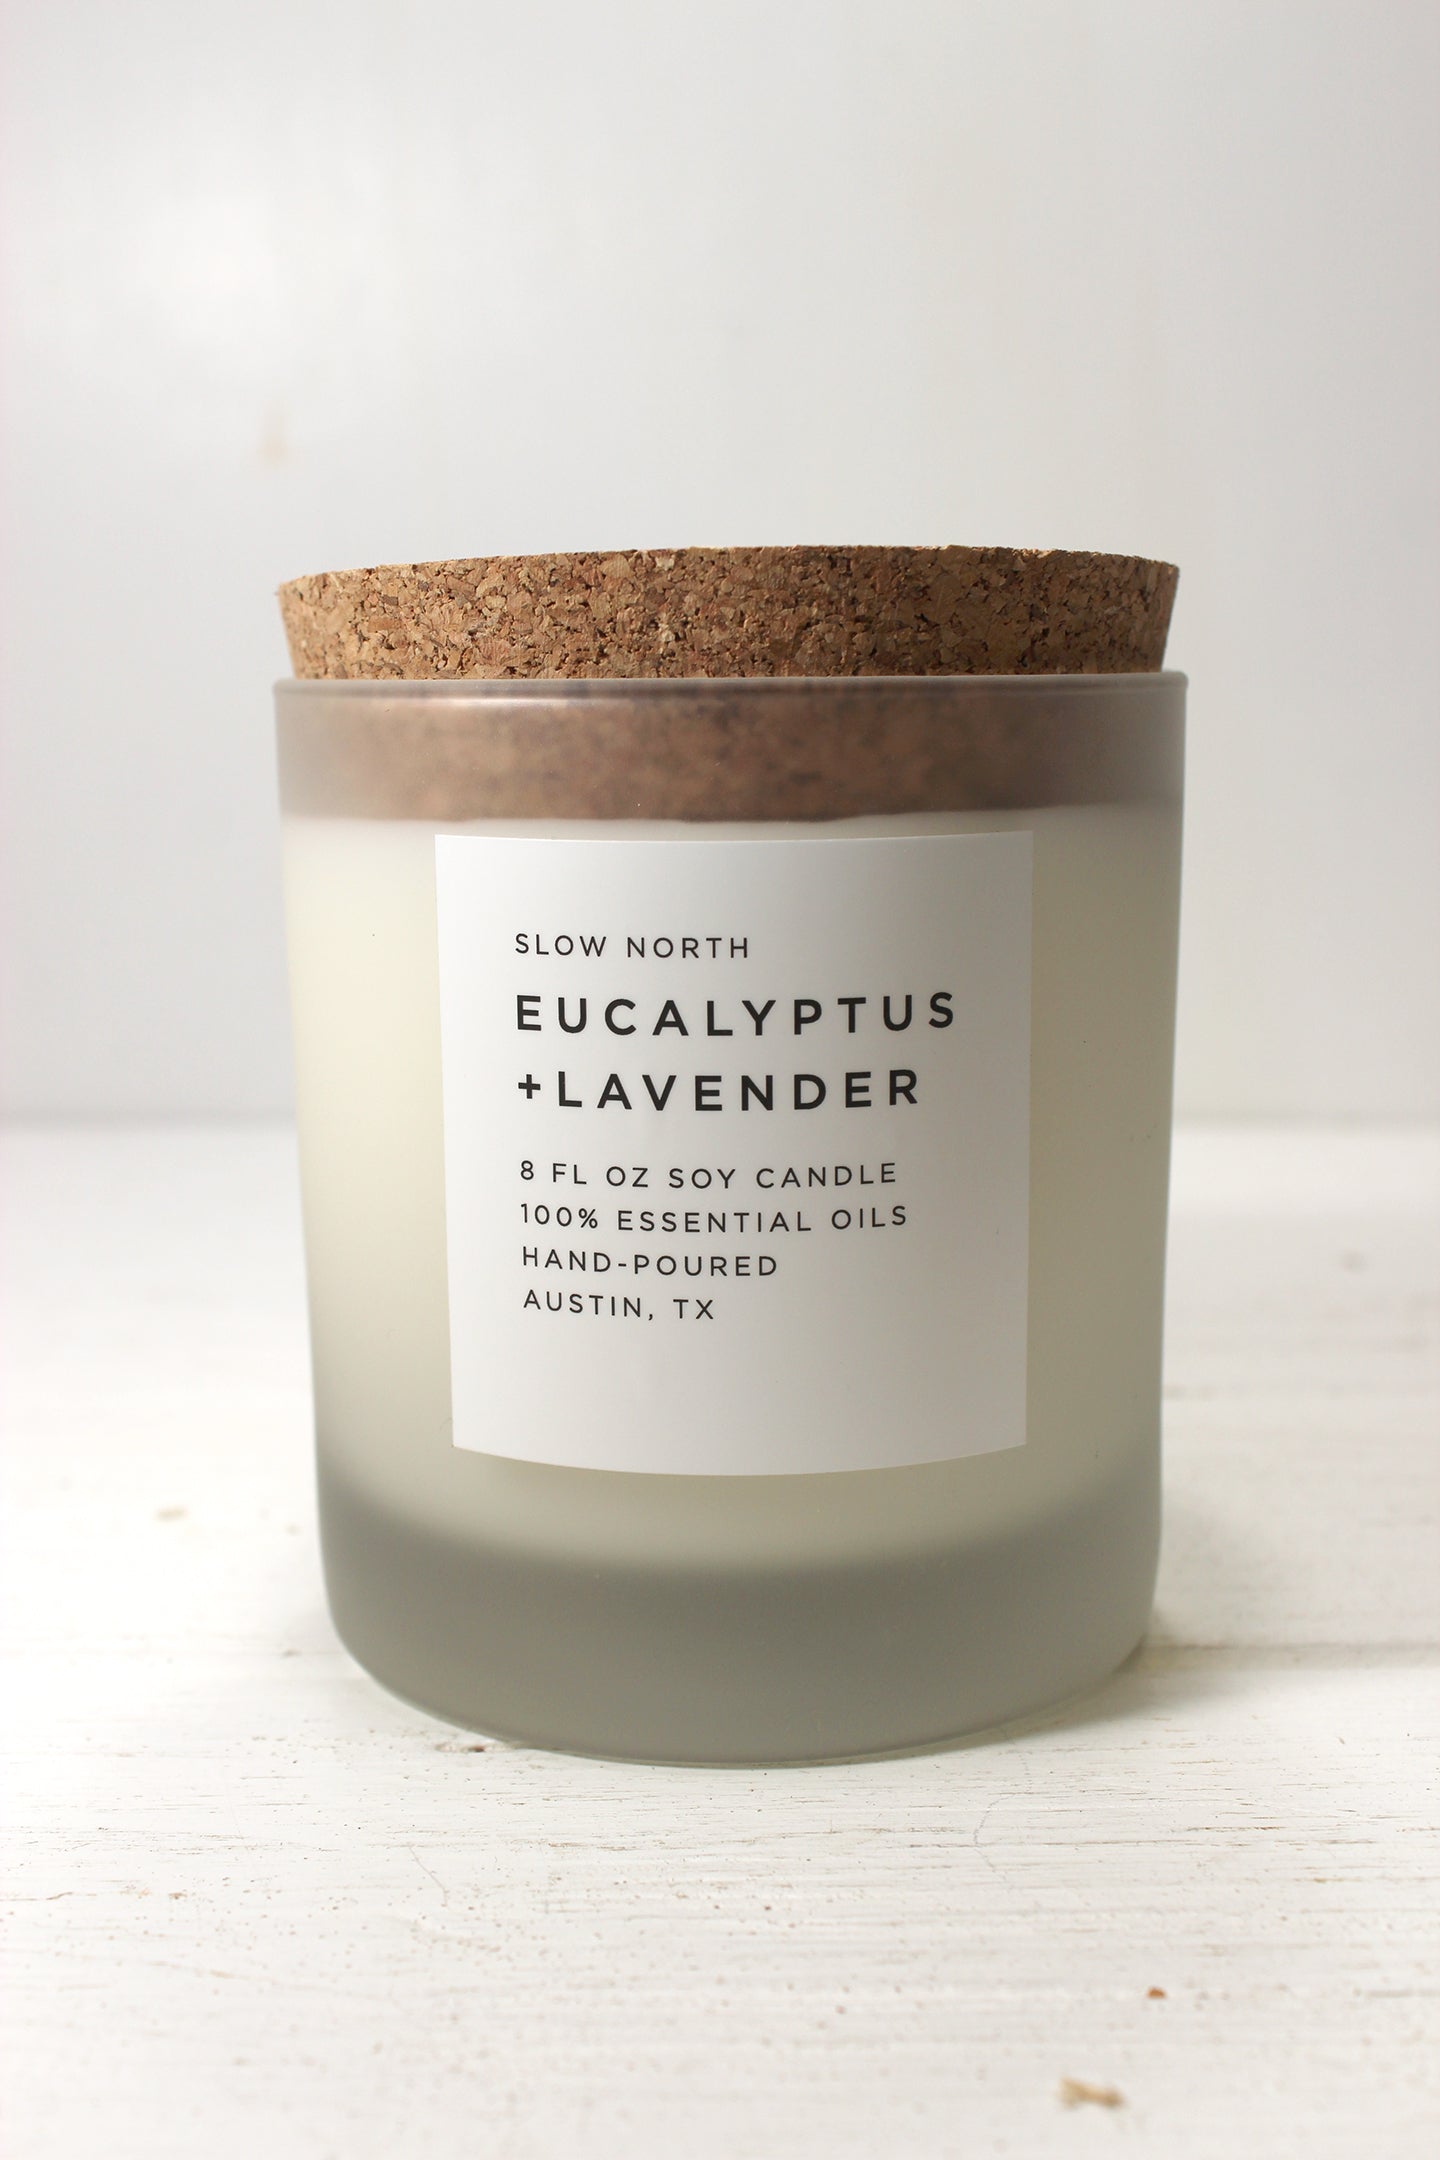 Eucalyptus + Lavender by Slow North